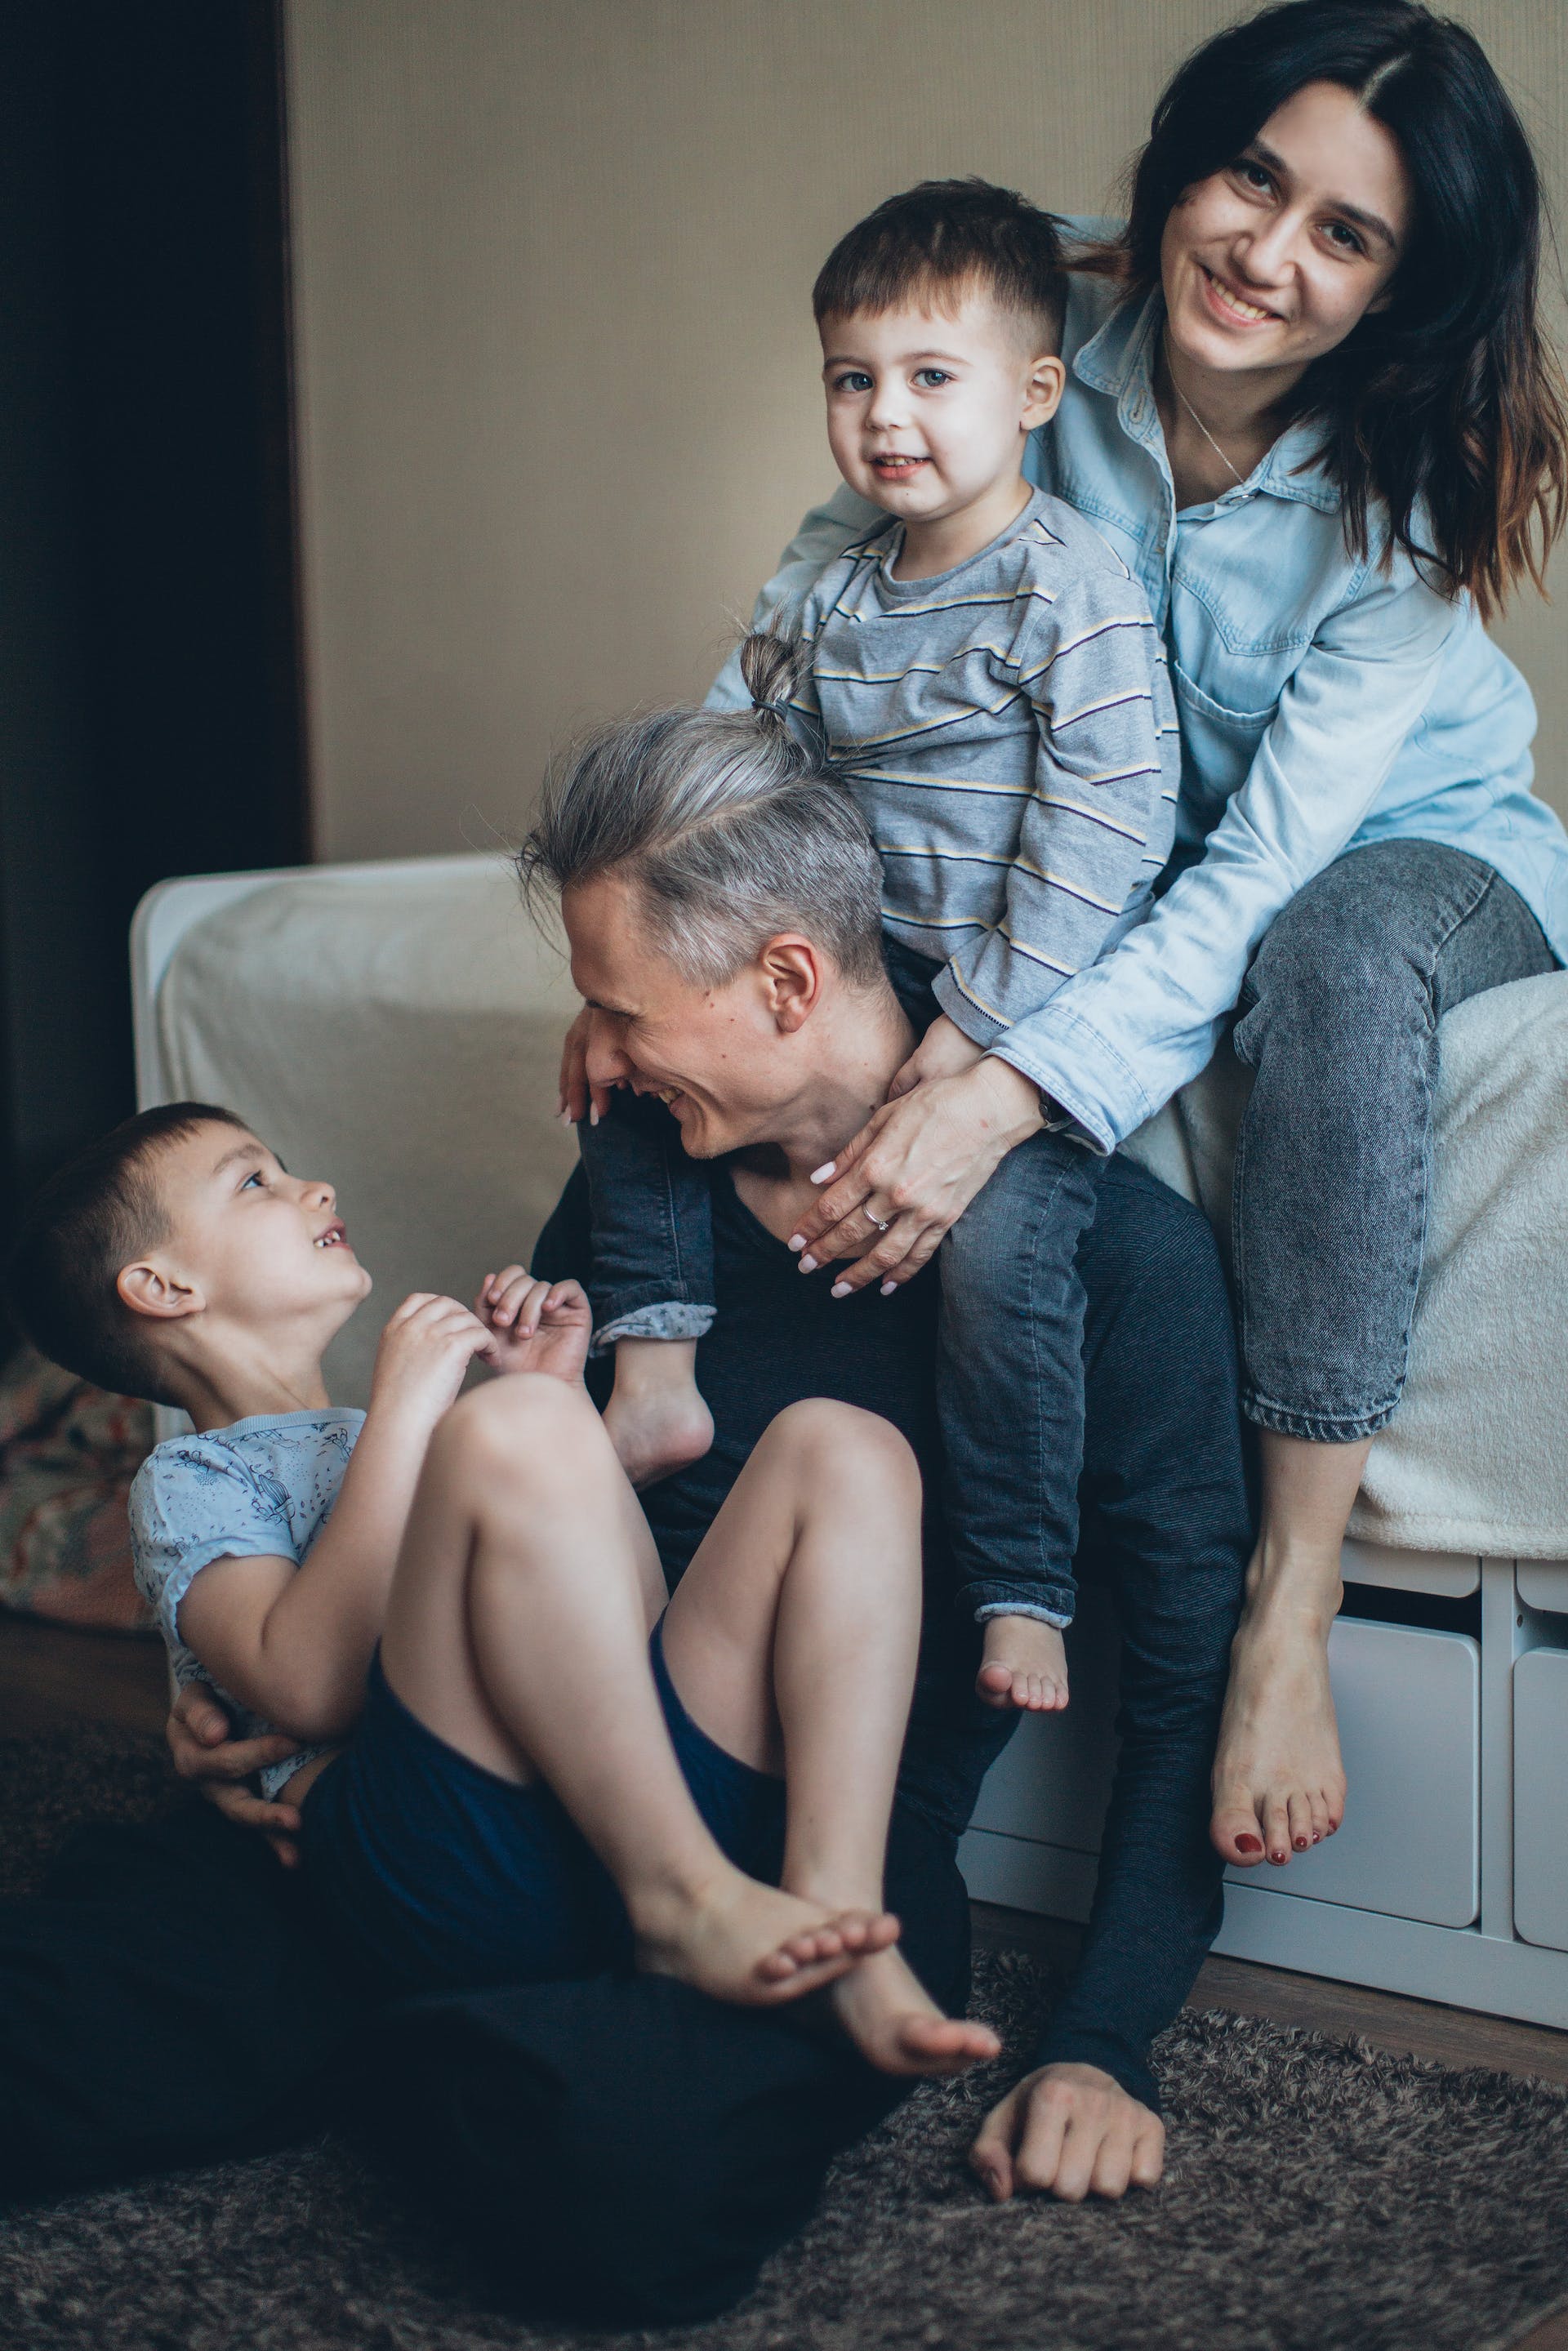 A happy couple playing with their two sons | Source: Pexels